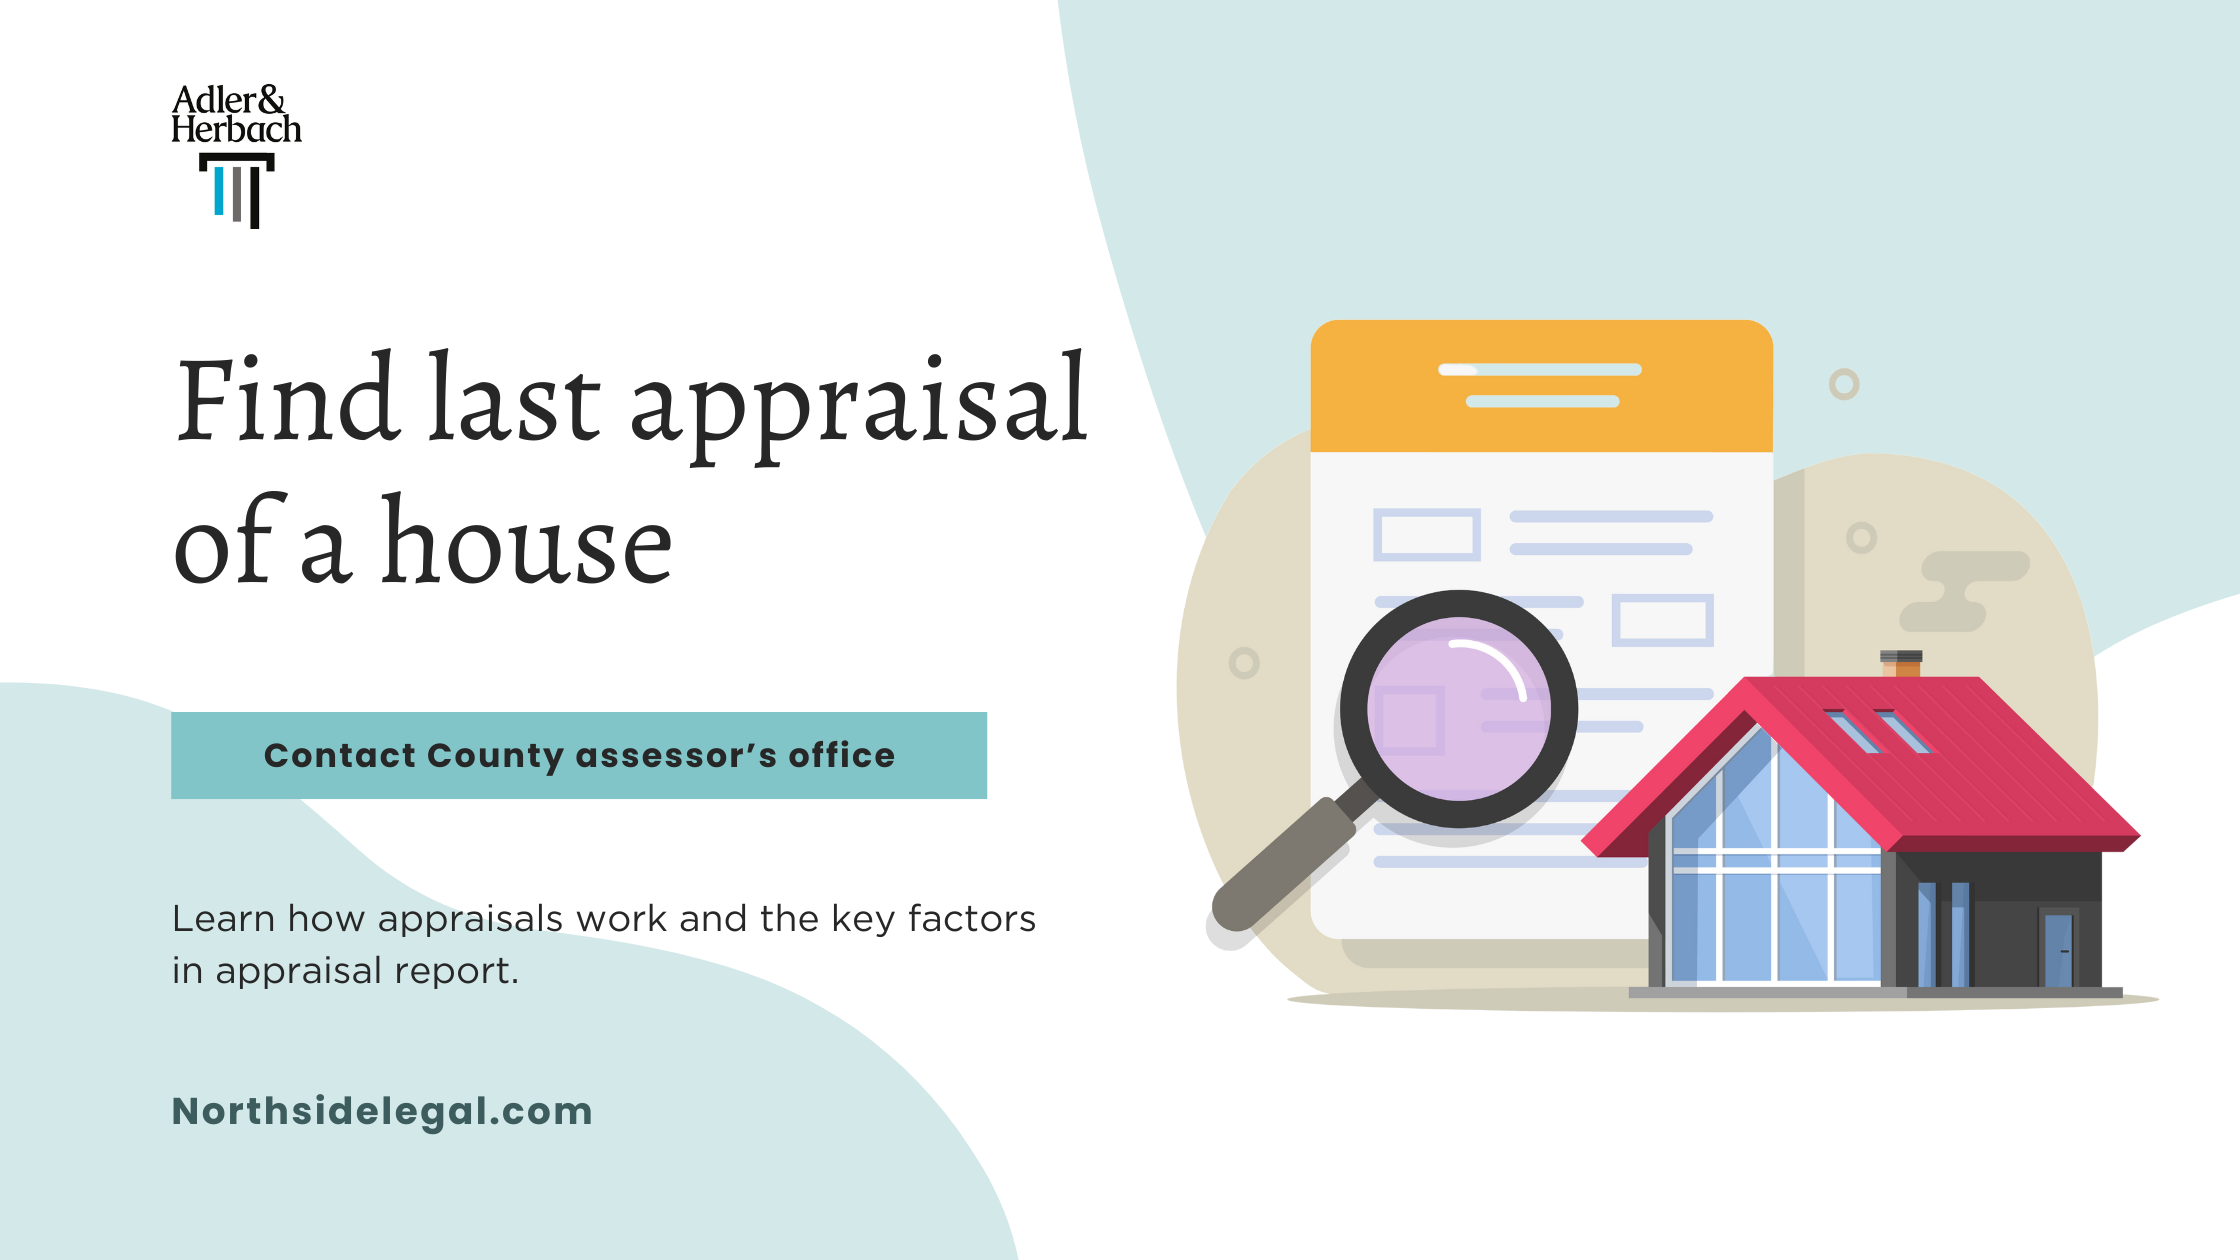 How Do I Find the Last Appraisal of a House